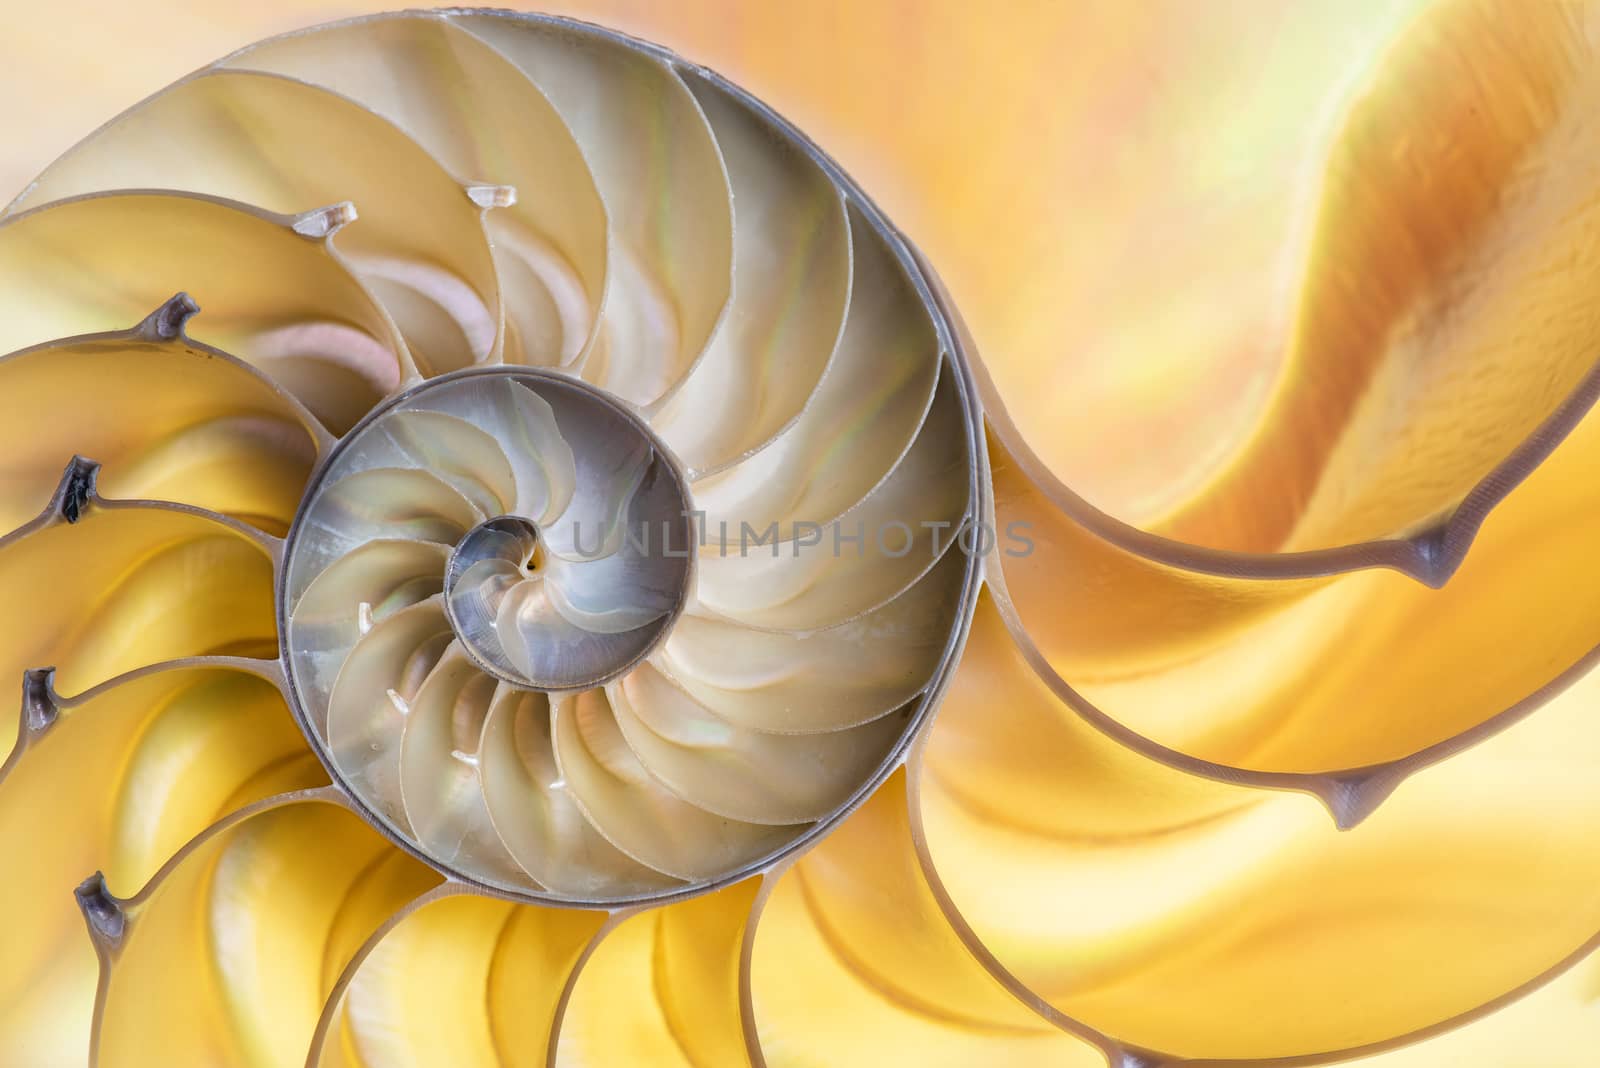 Detail of nautilus spiral shell by fyletto